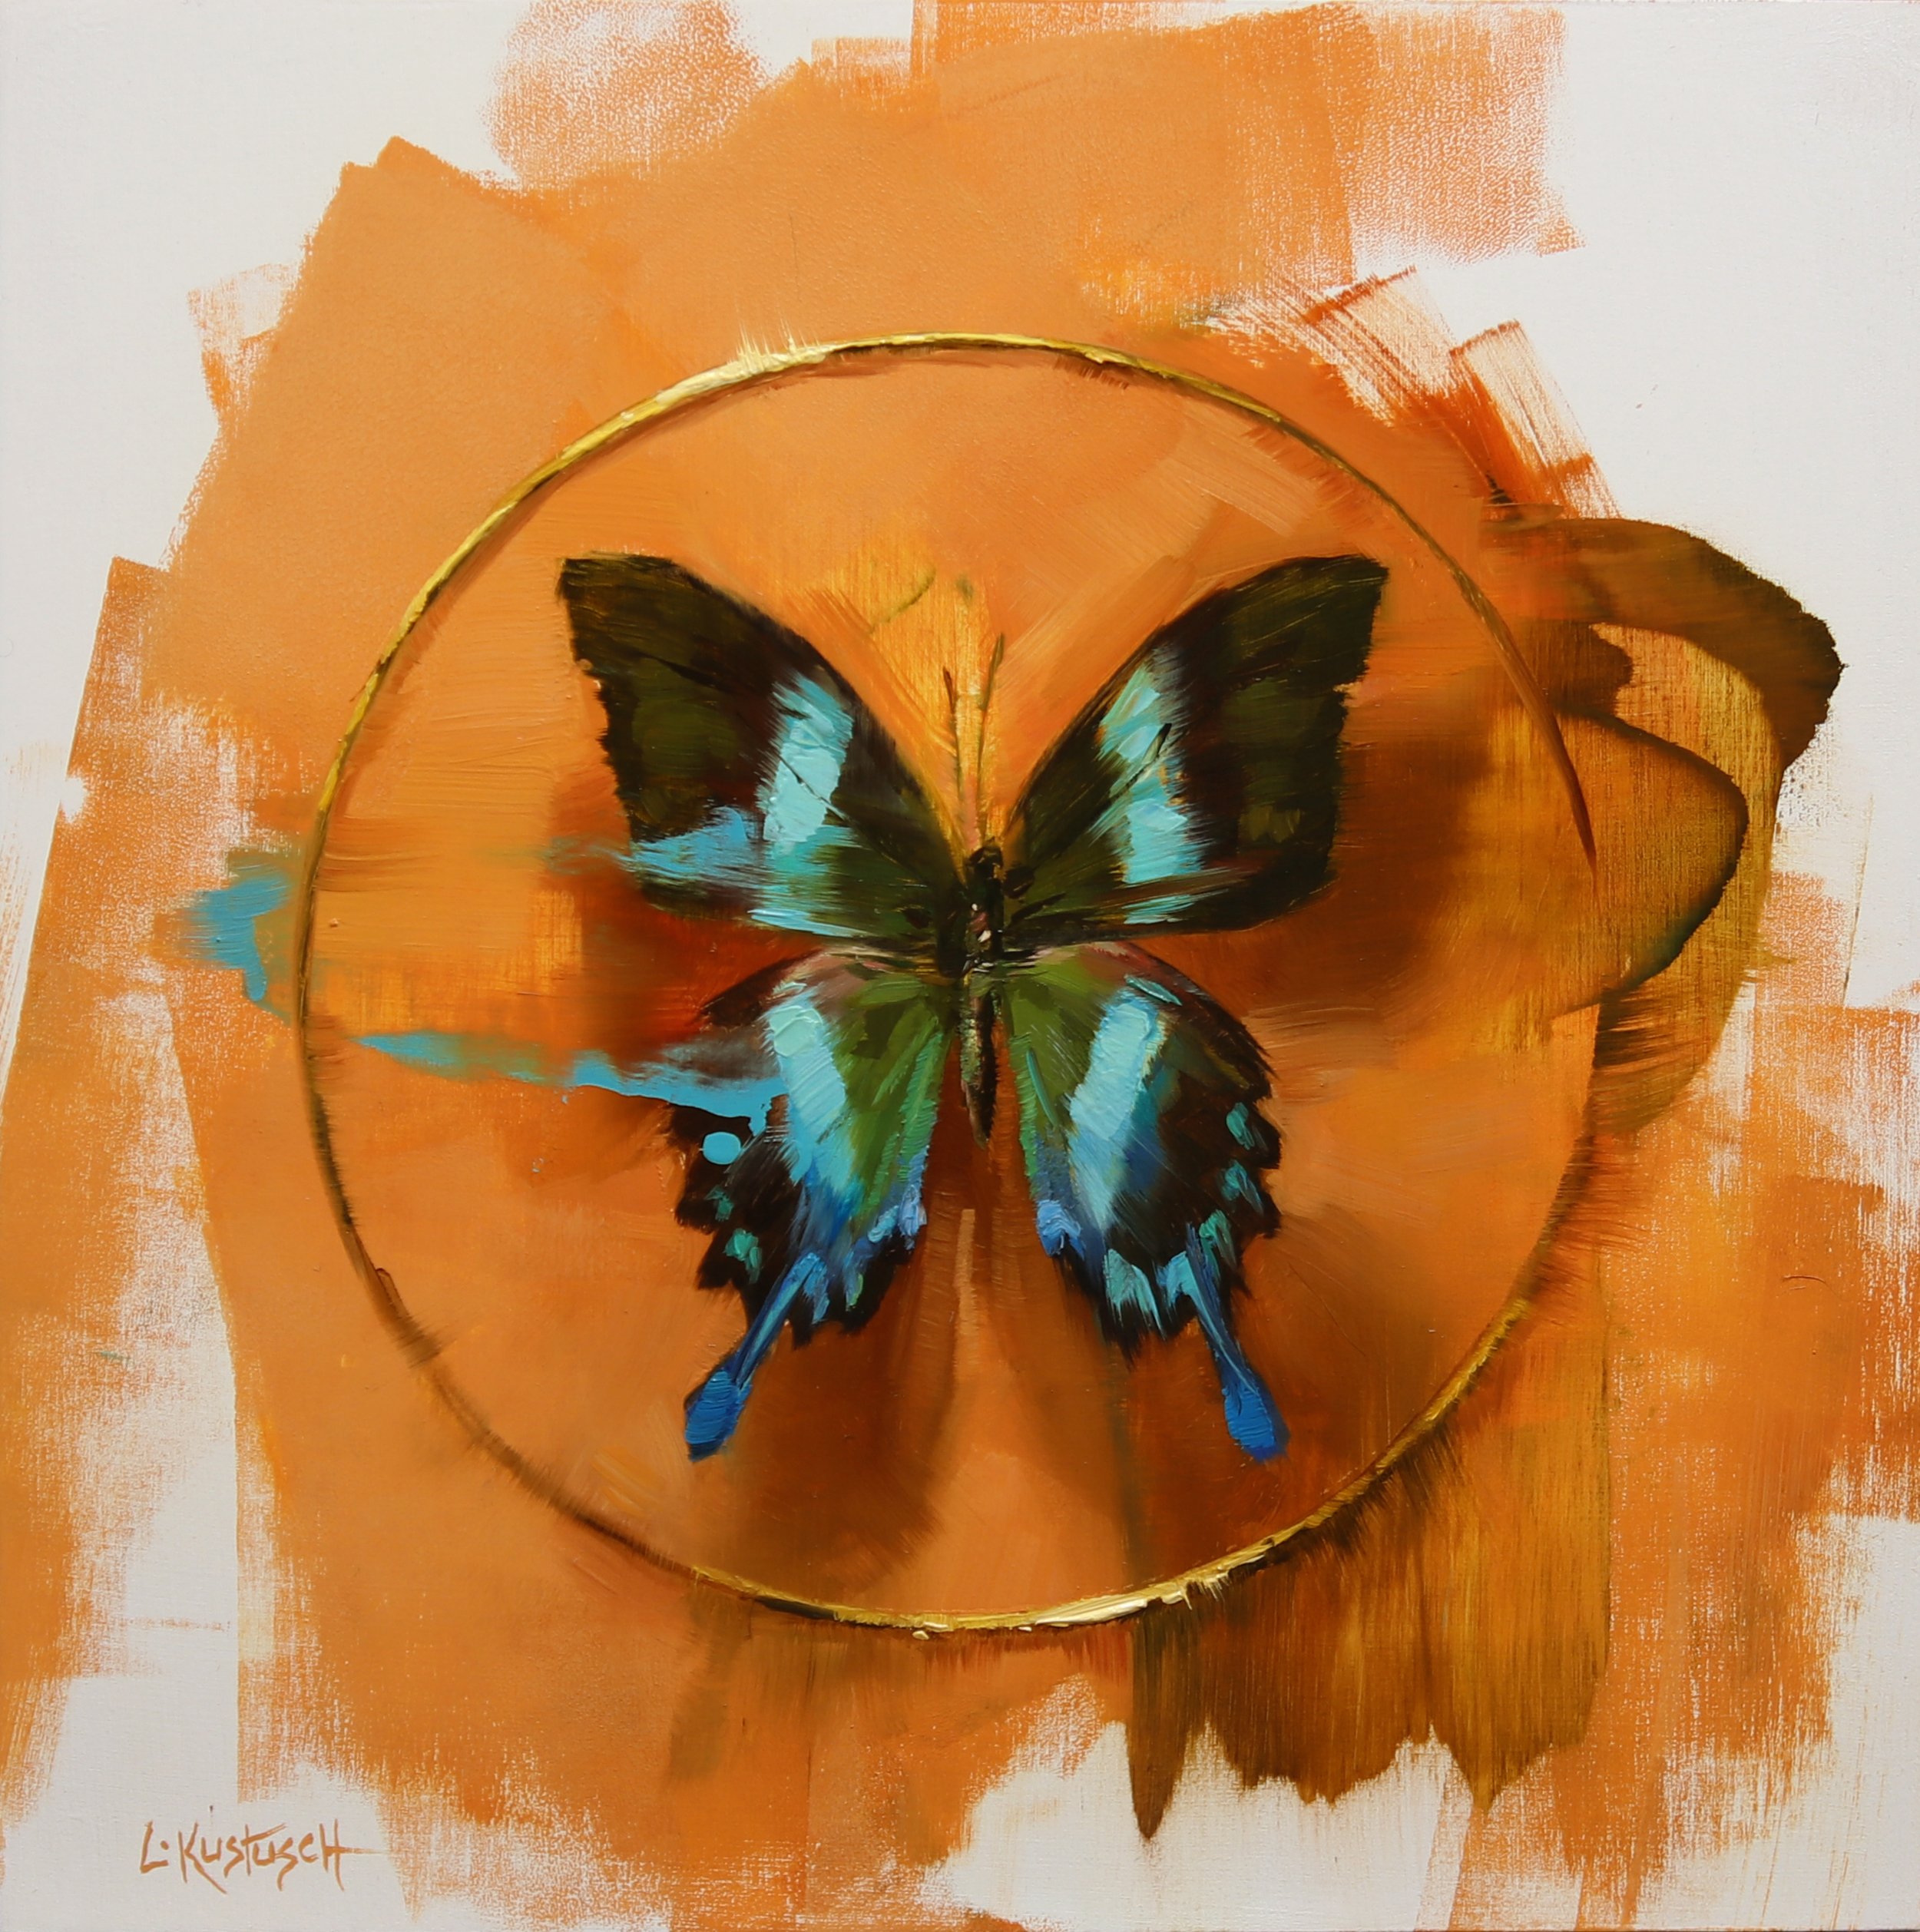 The Green Swallowtail on Shades of Peach by Lindsey Kustusch